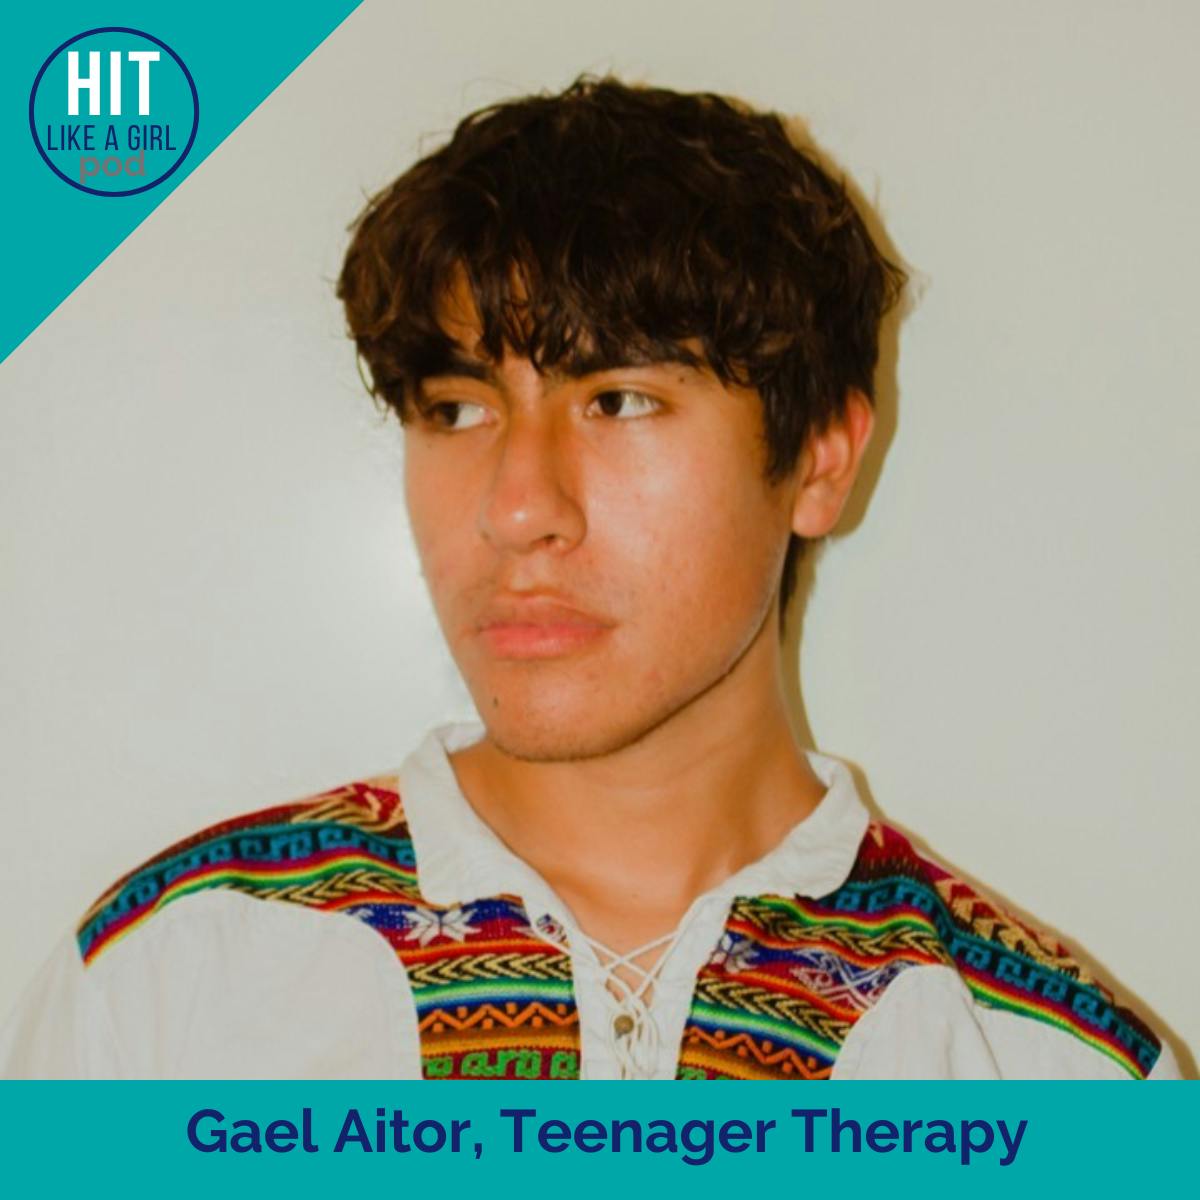 Gael Aitor Shares his Coming-of-Age Story in Real-Time